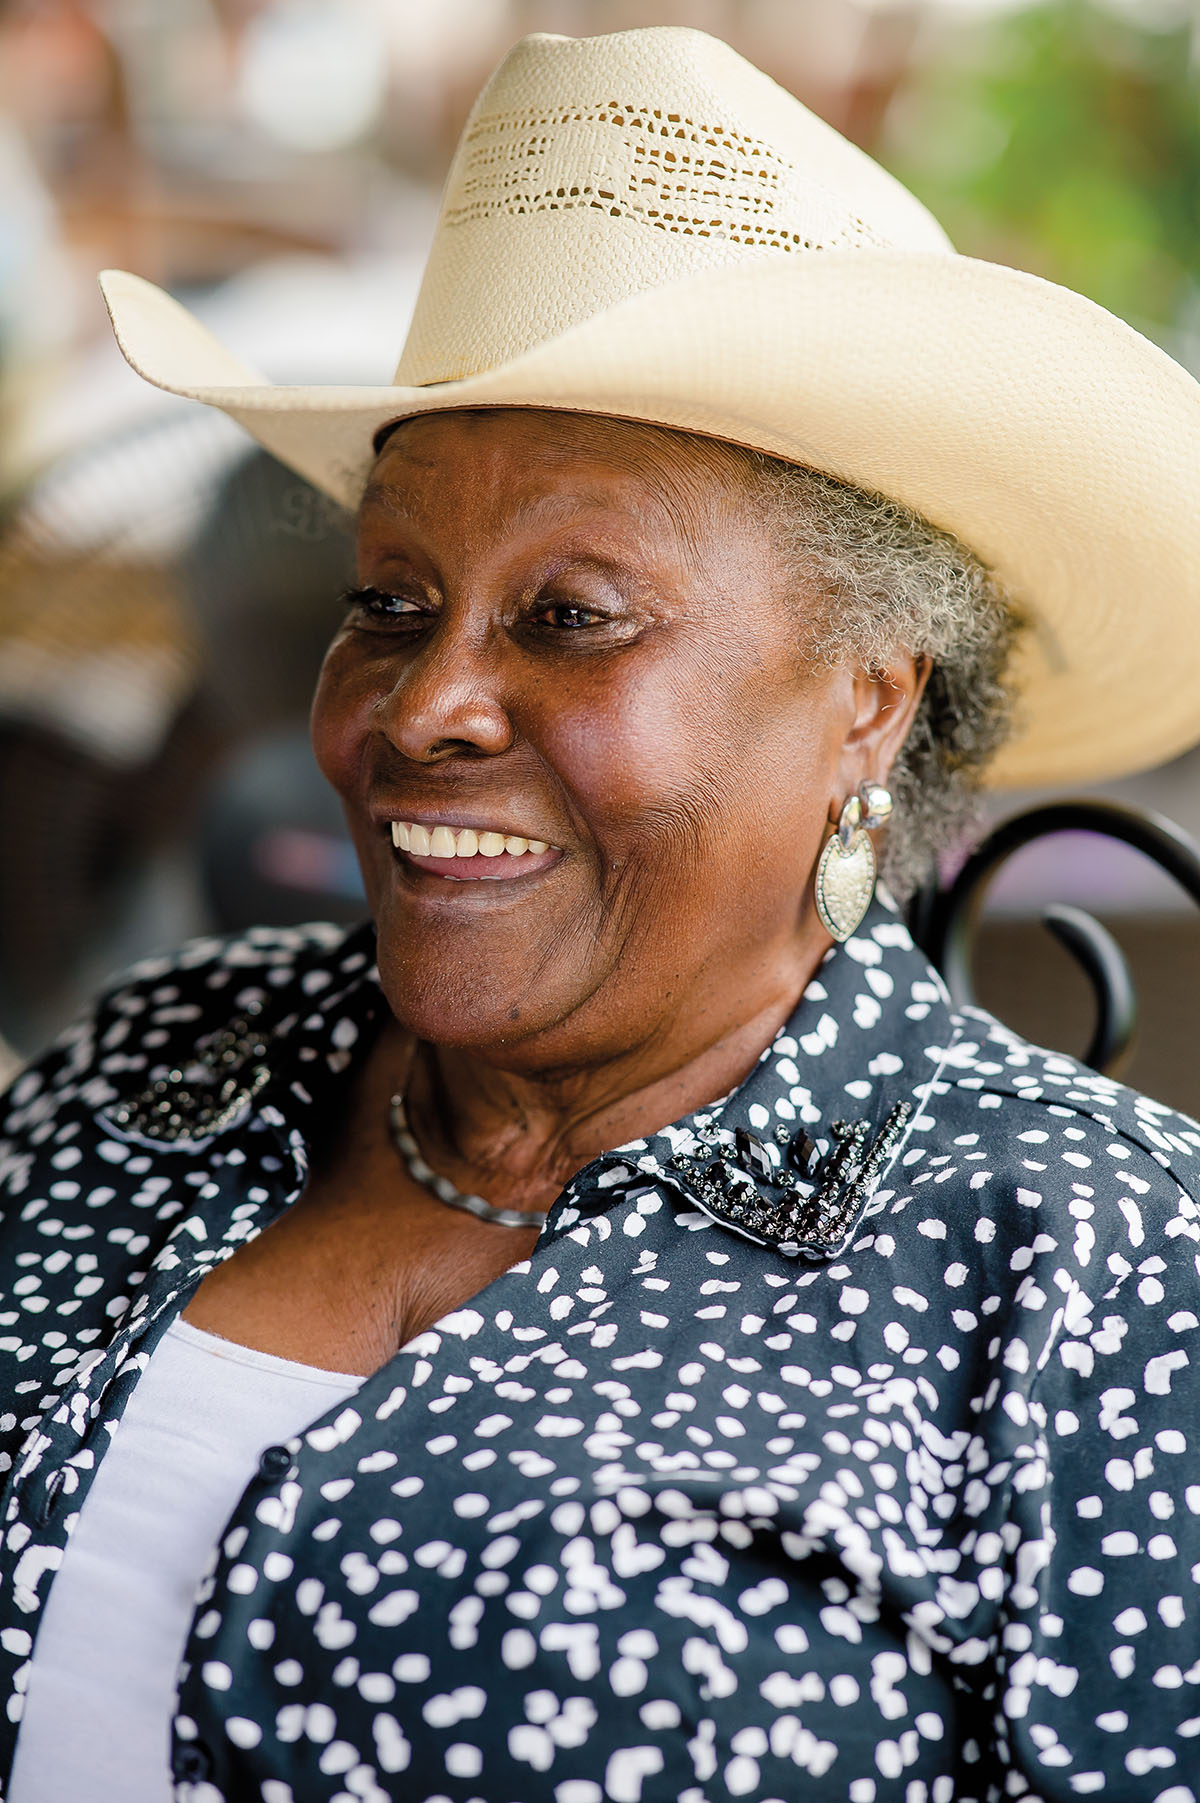 A woman in a tan cowboy hat and pattern shirt smiles